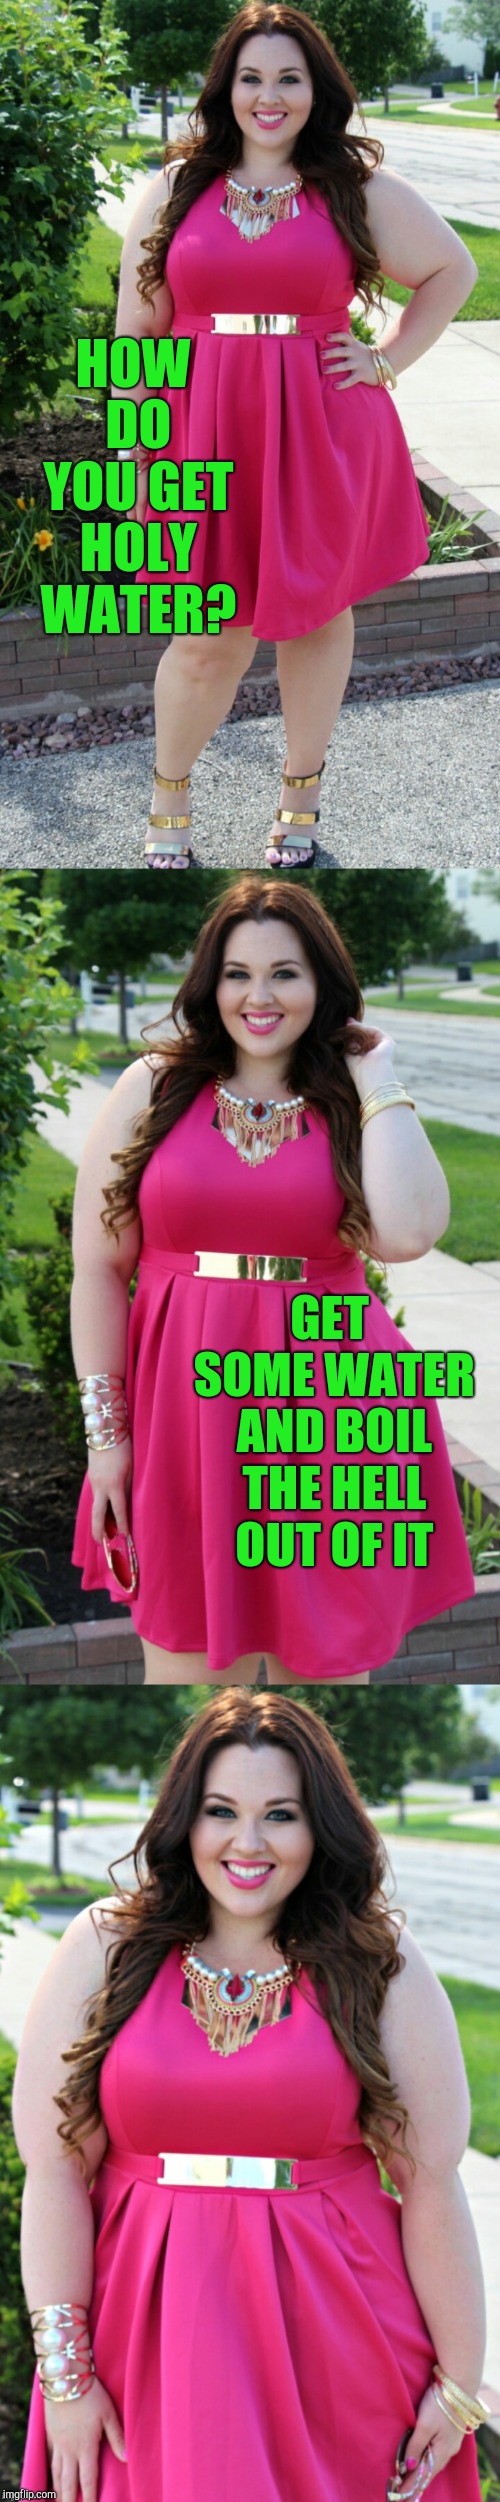 Sarah Rae Vargas joke template | HOW DO YOU GET HOLY WATER? GET SOME WATER AND BOIL THE HELL OUT OF IT | image tagged in sarah rae vargas joke template 1,sarah rae vargas,jbmemegeek,bad puns | made w/ Imgflip meme maker